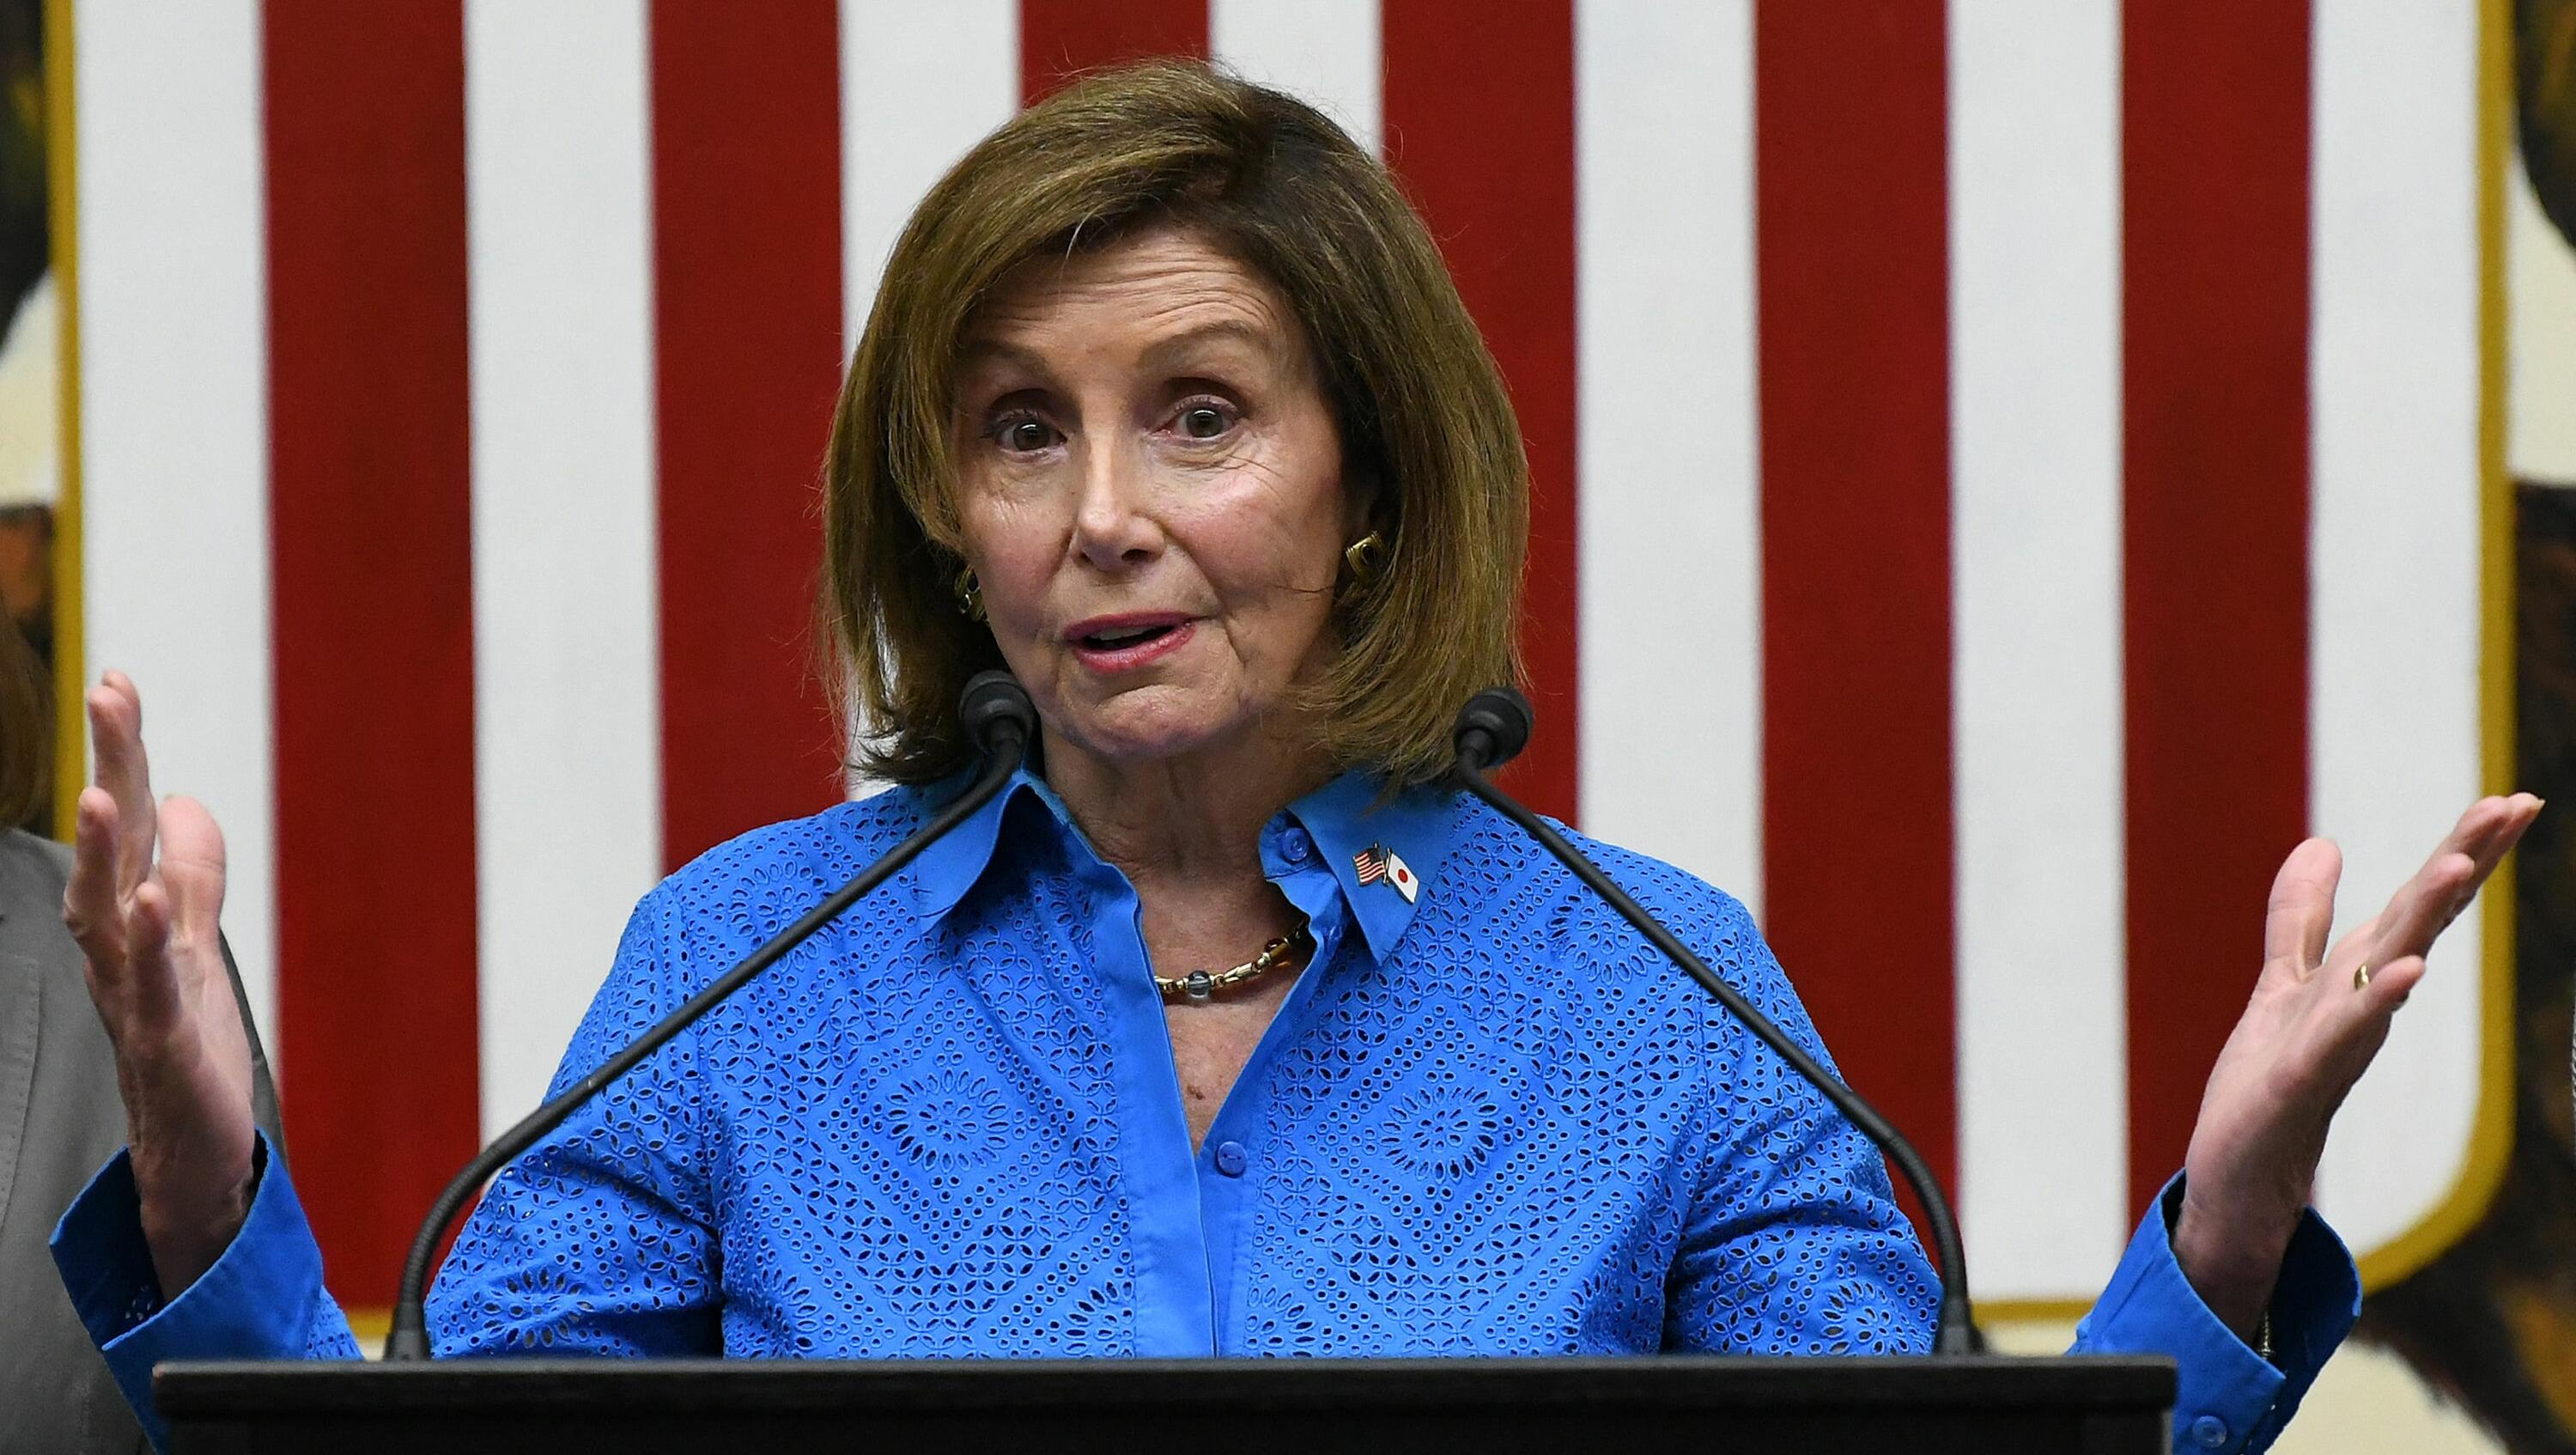 Nancy Pelosi Has Ridiculous "Childhood Connection" to China